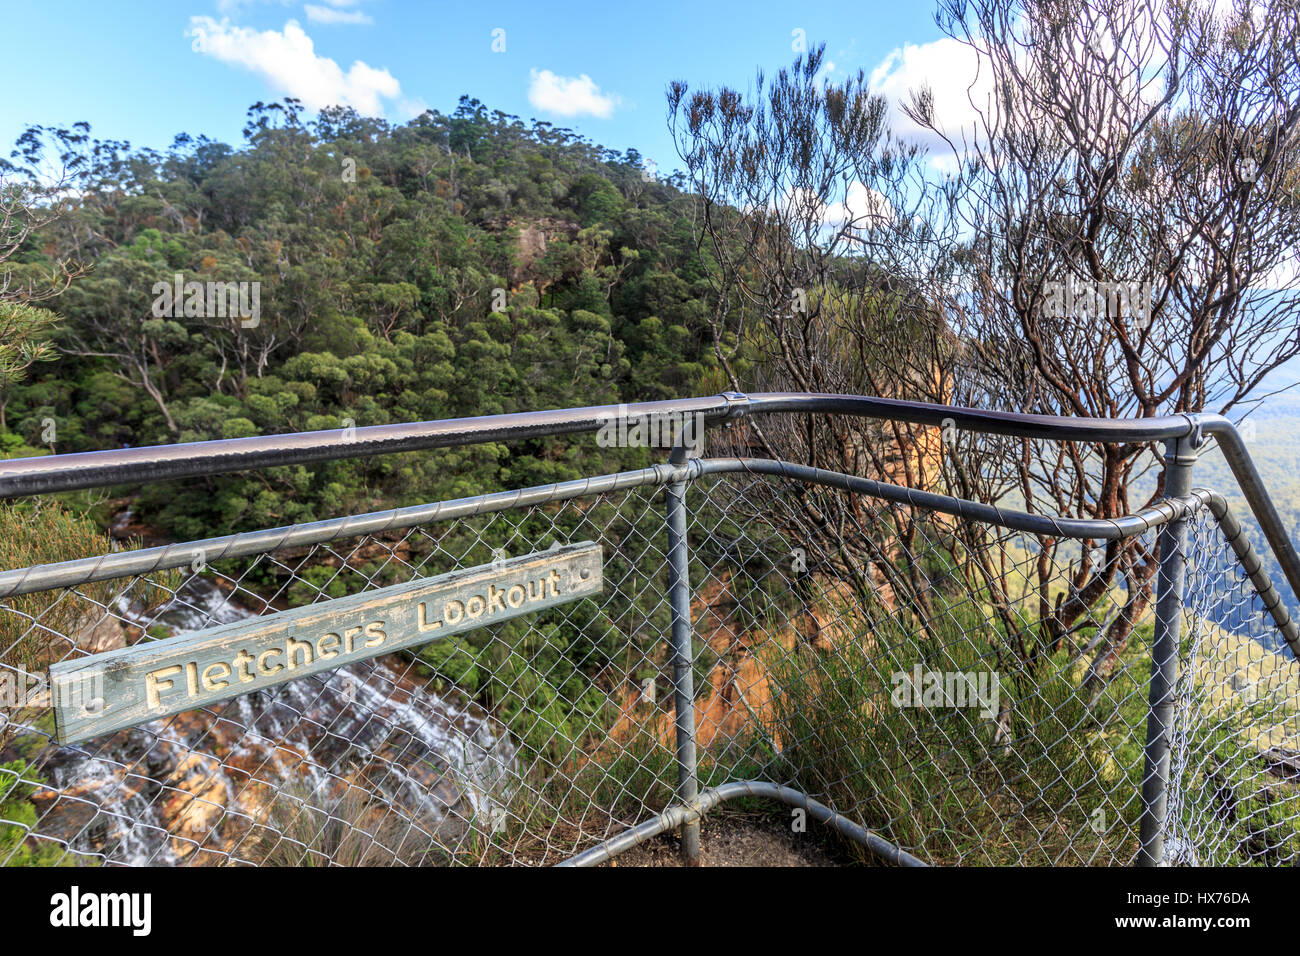 Fletchers Lookout at Wentworth Falls waterfall, Blue mountains national park,new south wales,australia Stock Photo